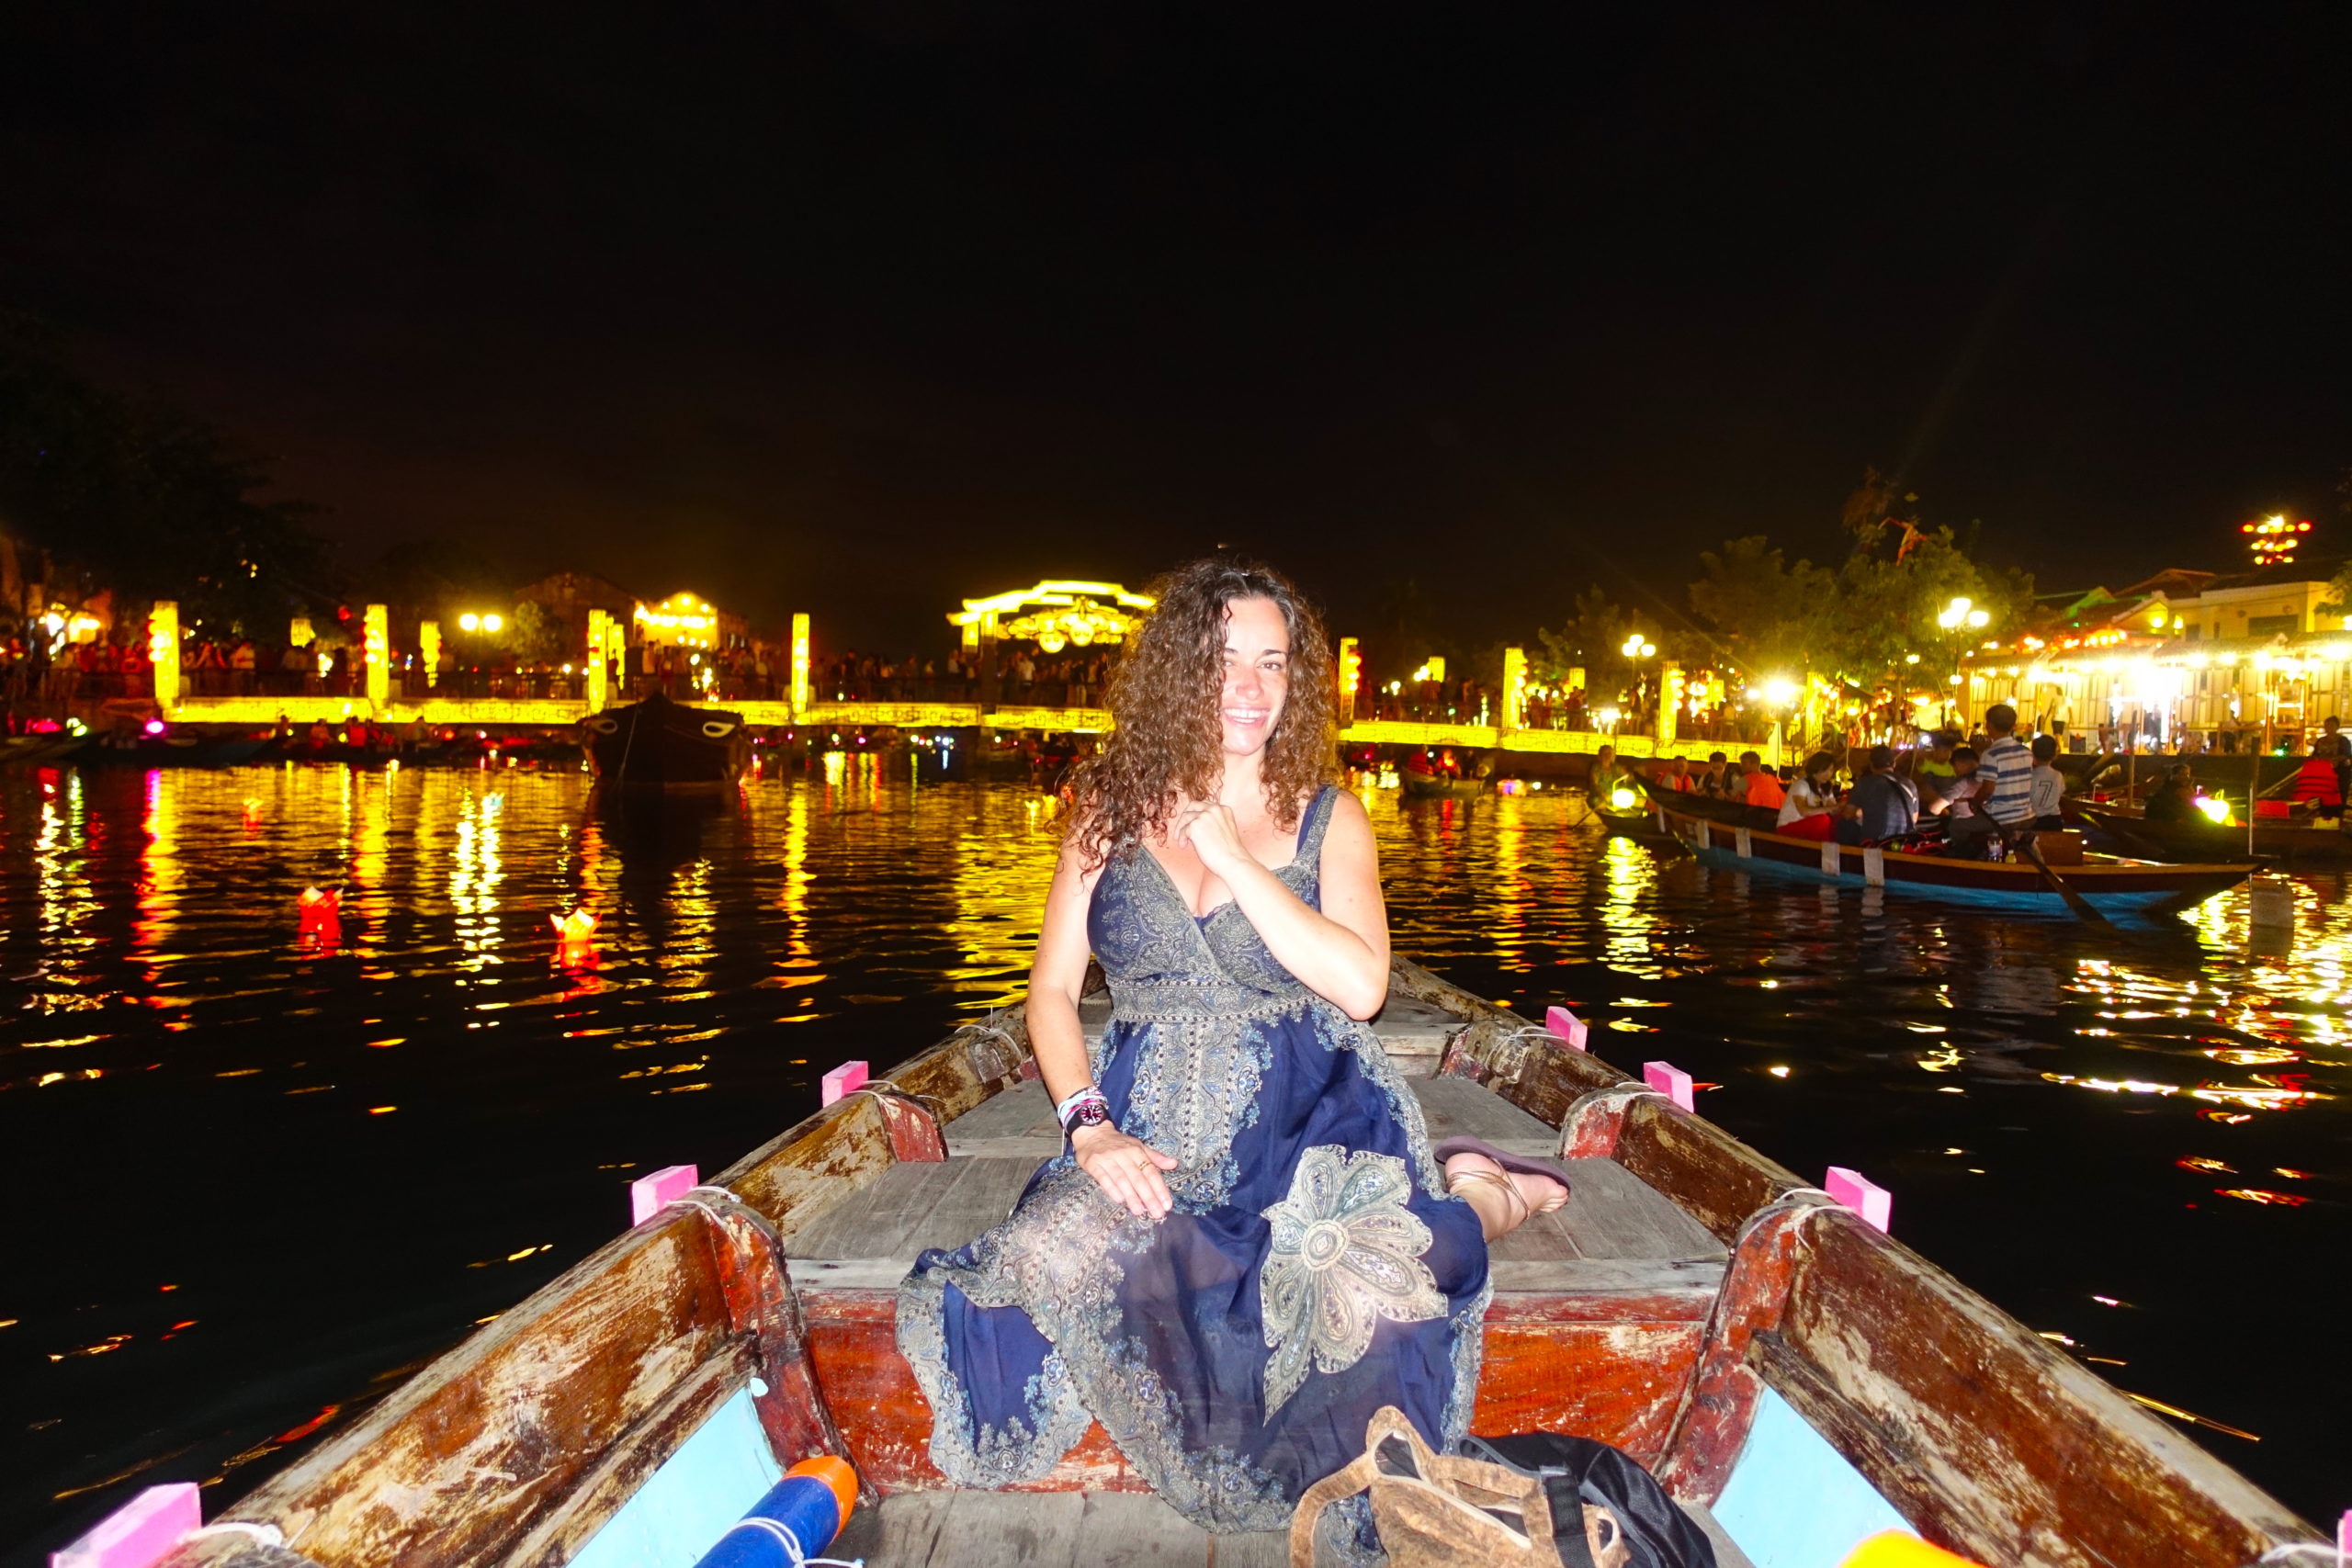 Pilar on the boat tour ride at night in Hoi An